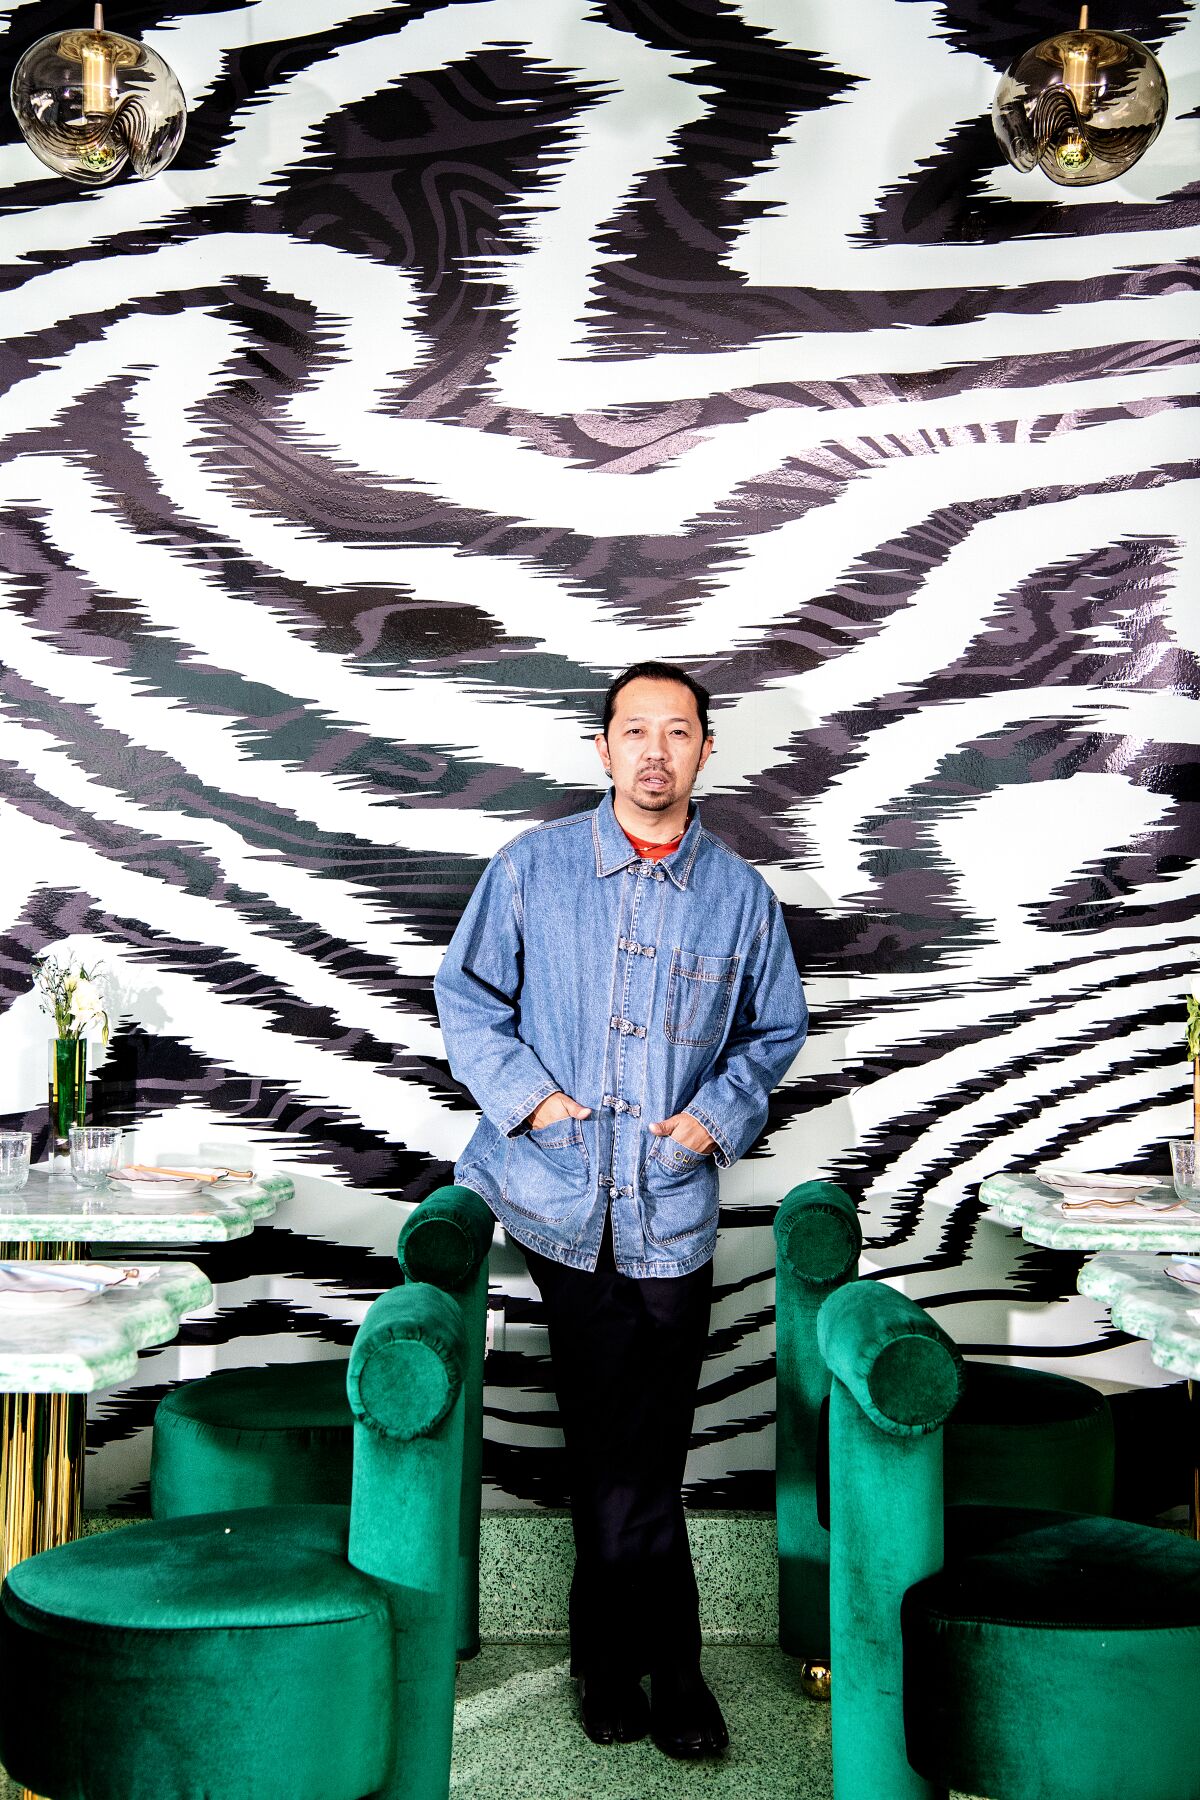 A man in a denim jacket stands between emerald green chairs against a zebra-print wall.